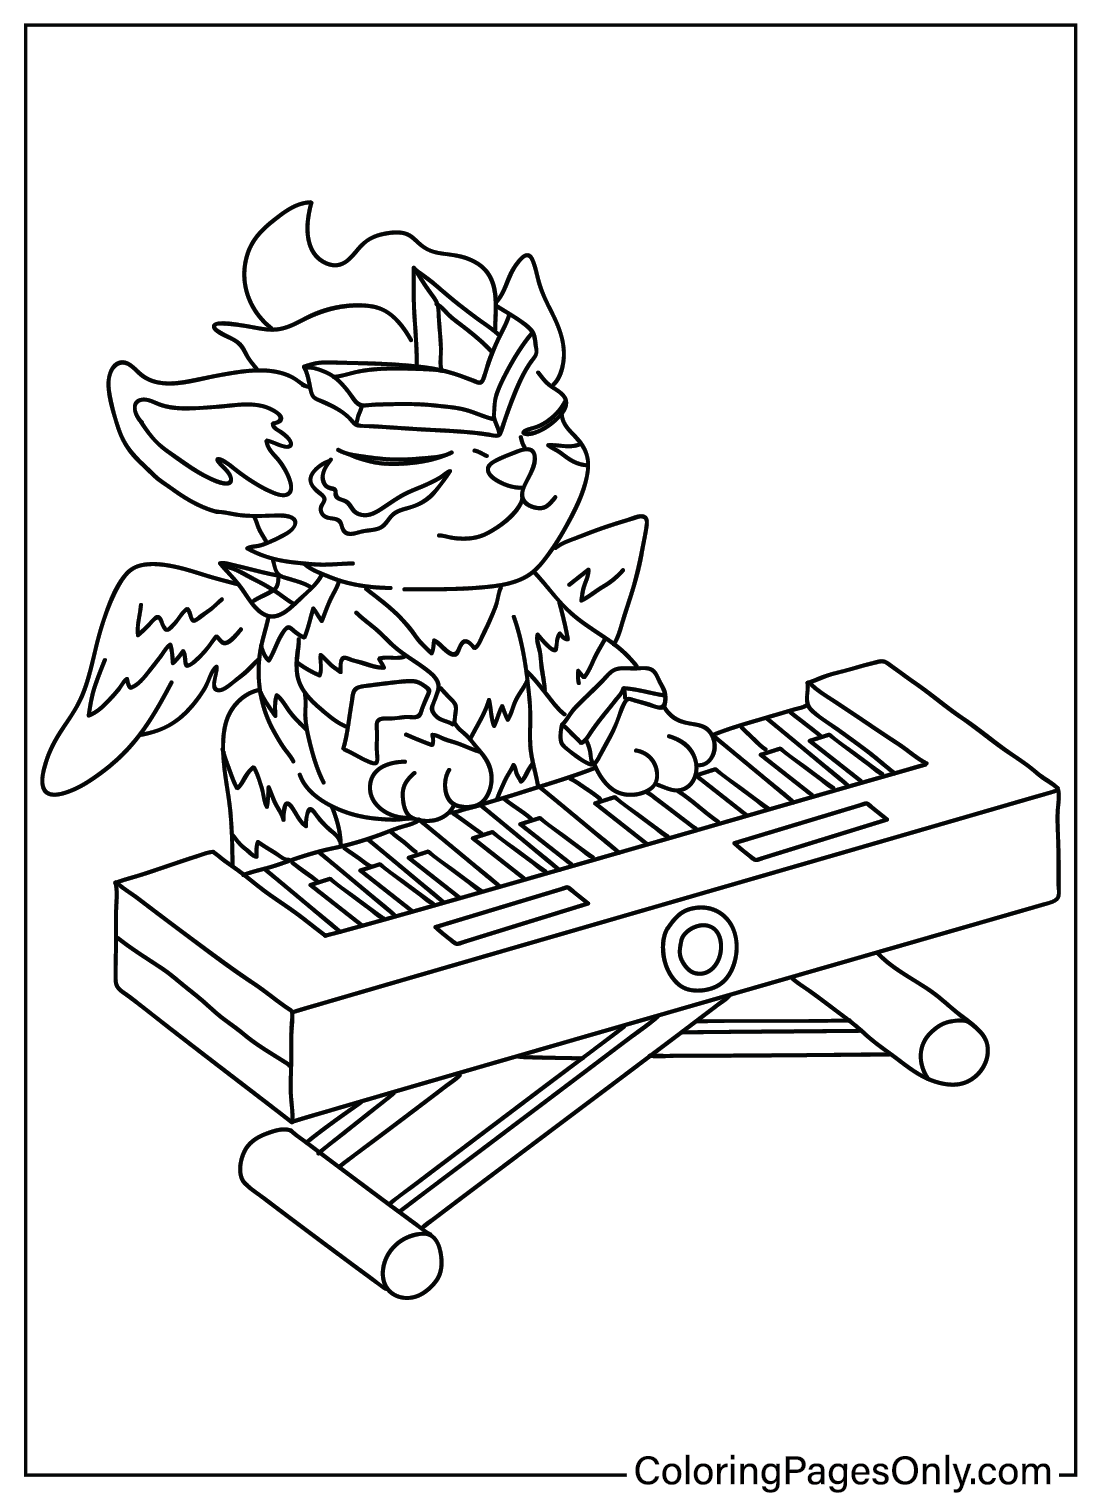 Protector Teamfight Tactics Coloring Page from Teamfight Tactics